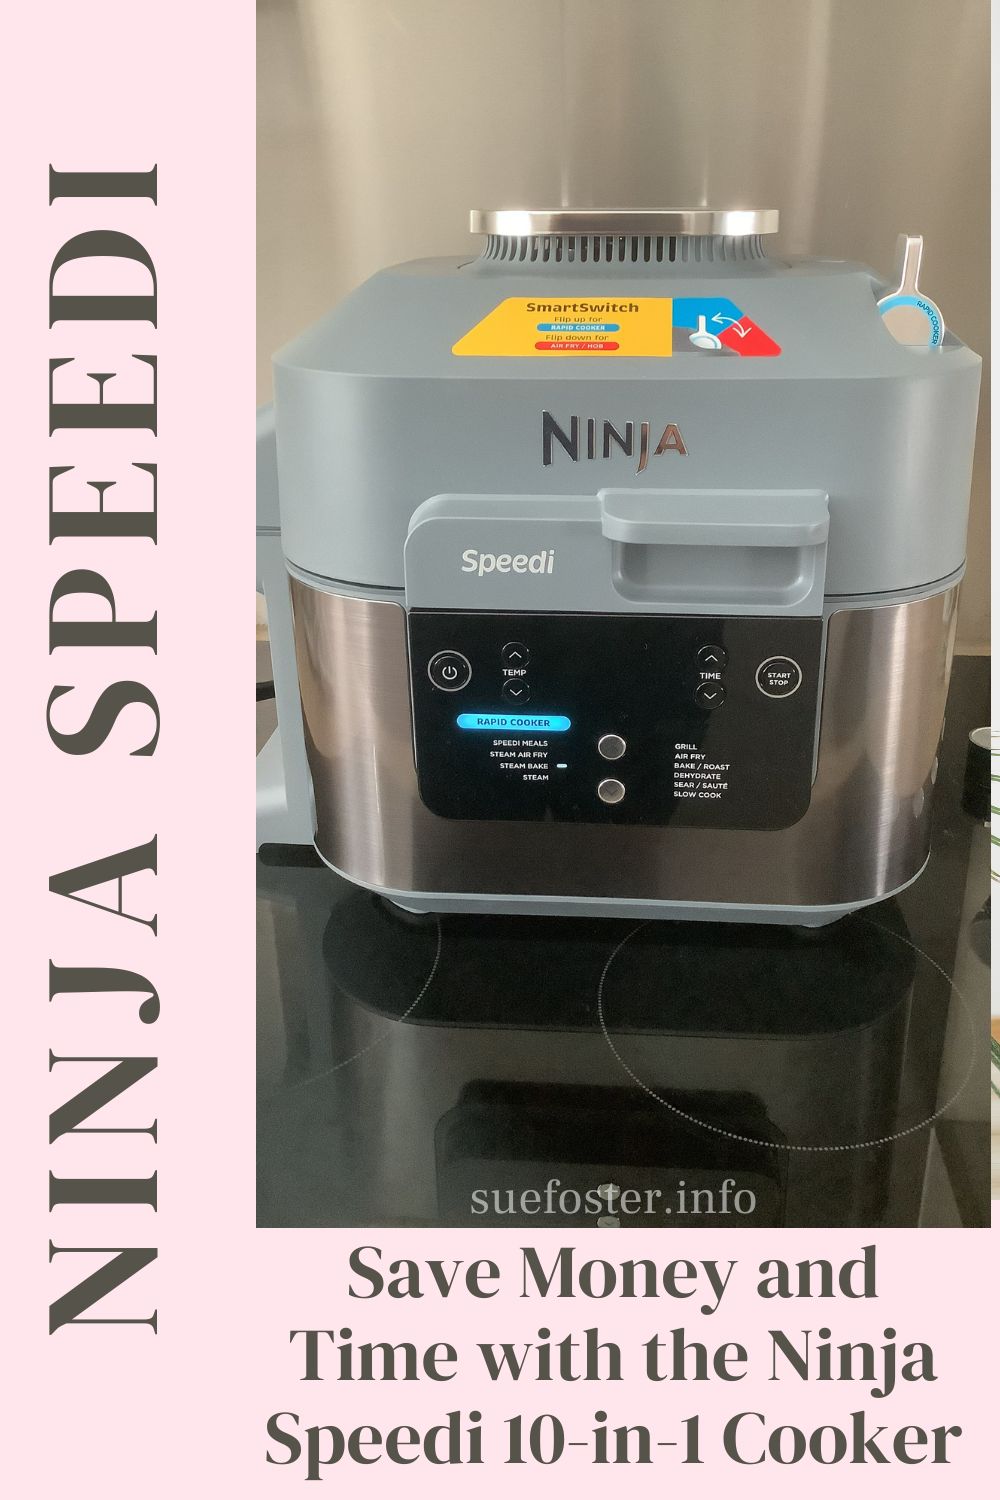 Experience the Ninja Speedi 10-in-1 Rapid Cooker - your key to saving time and money while simplifying meal prep with its versatile functions.